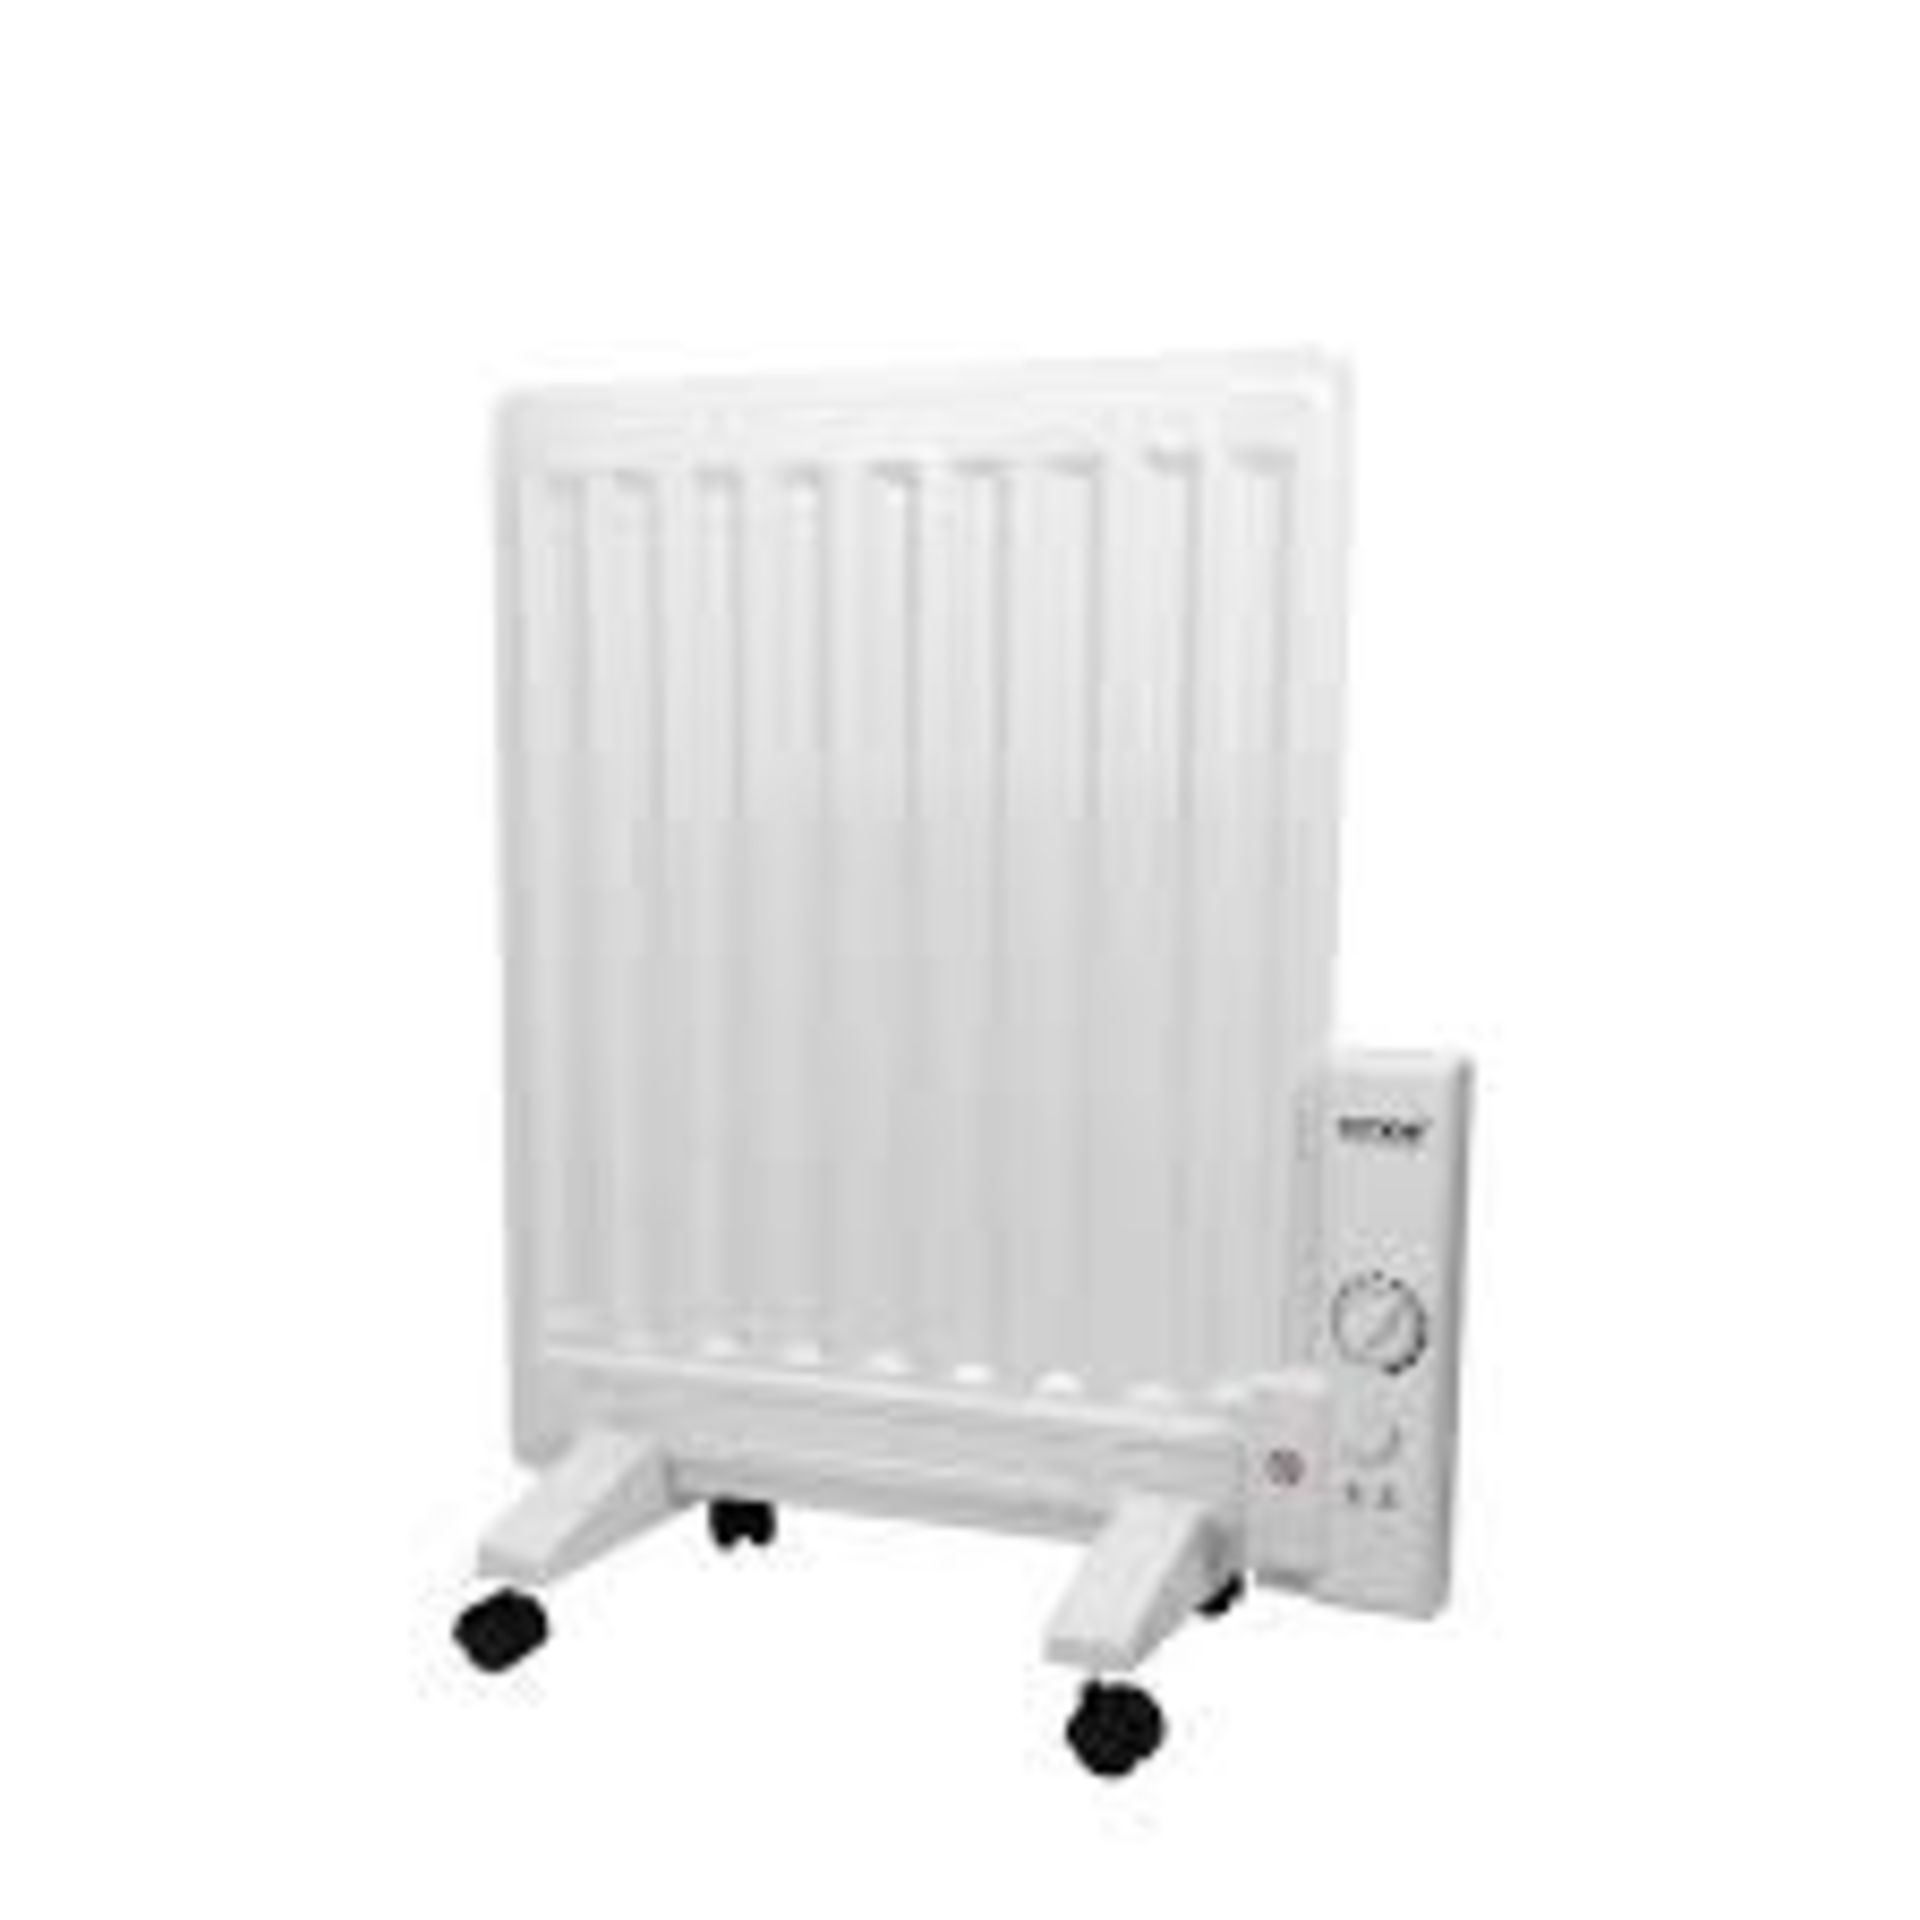 AMOS 400W Oil Filled Panel Radiator. - PW. Stay cozy with the AMOS Oil Filled Panel Heater 400W.